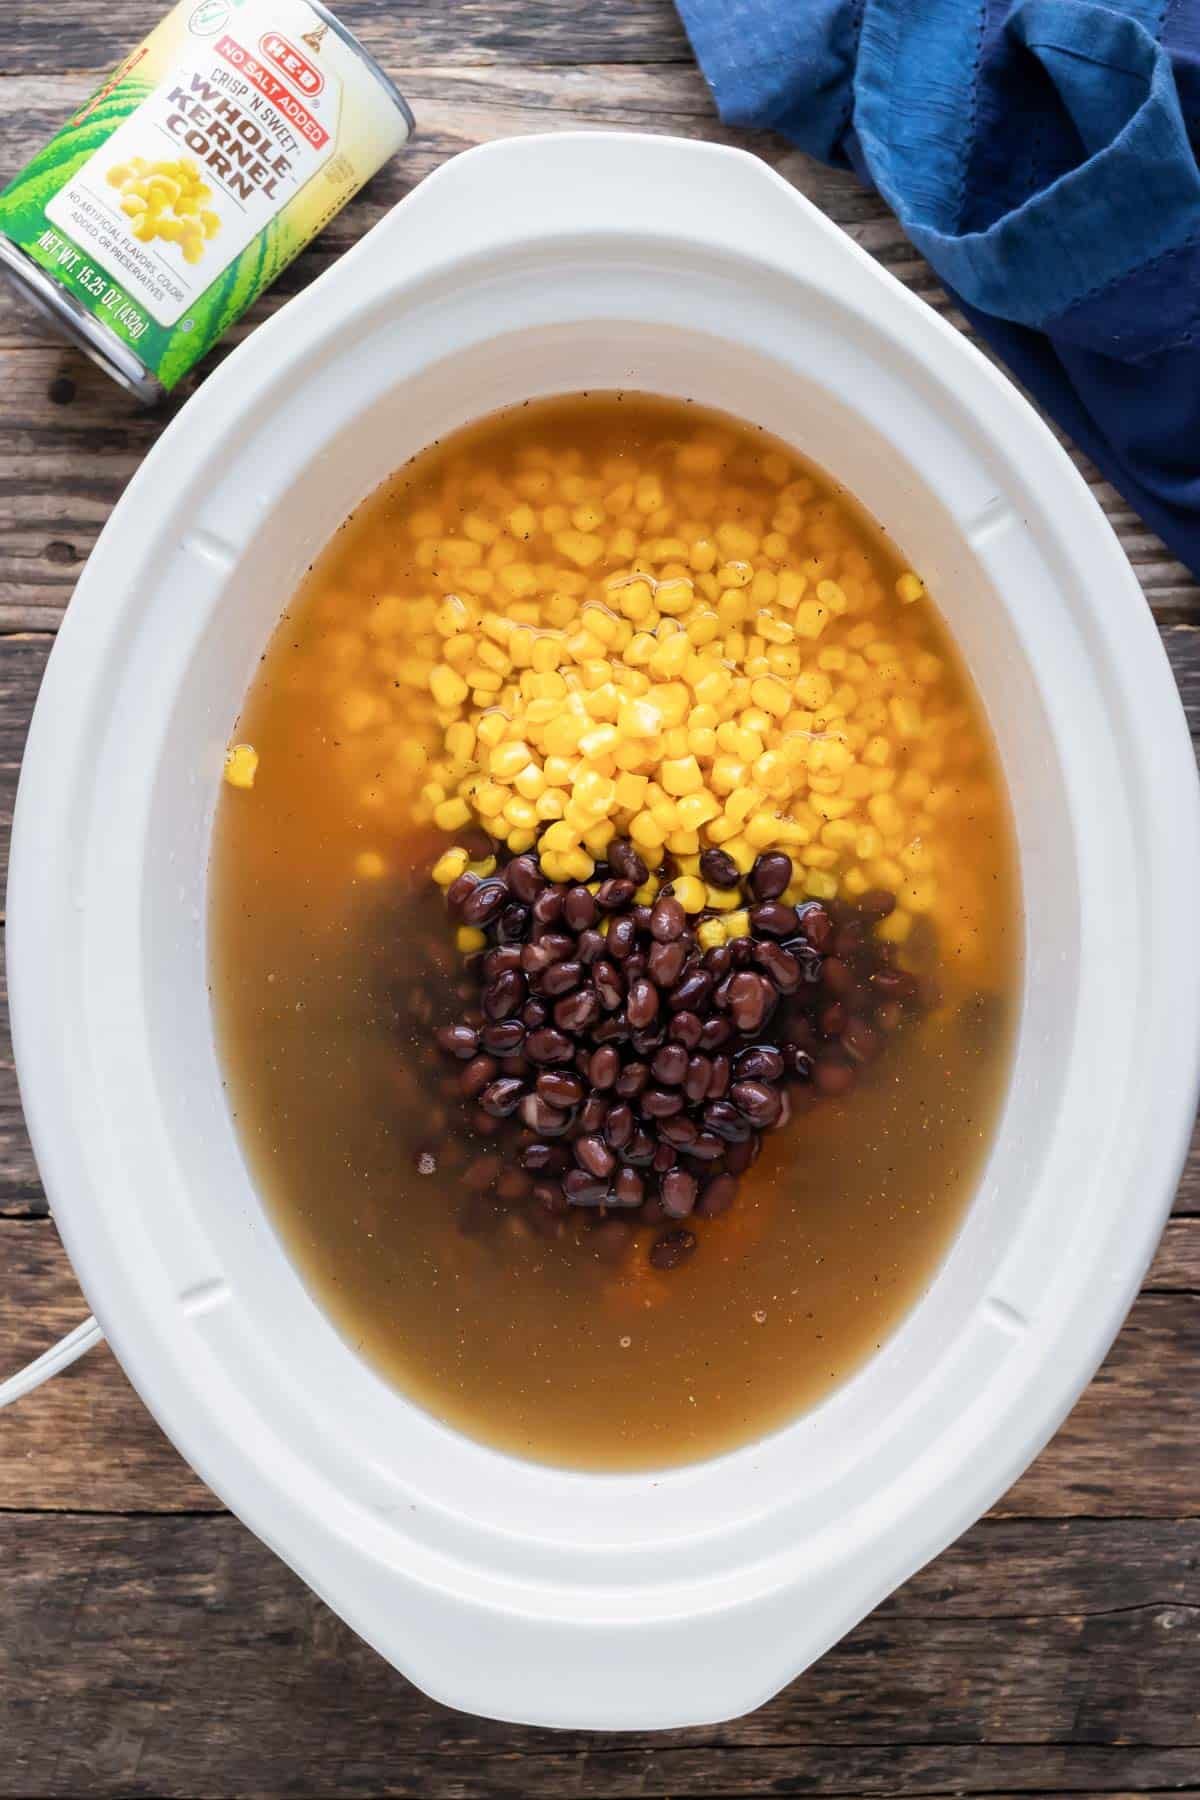 Corn and beans are aded to the soup mixture.